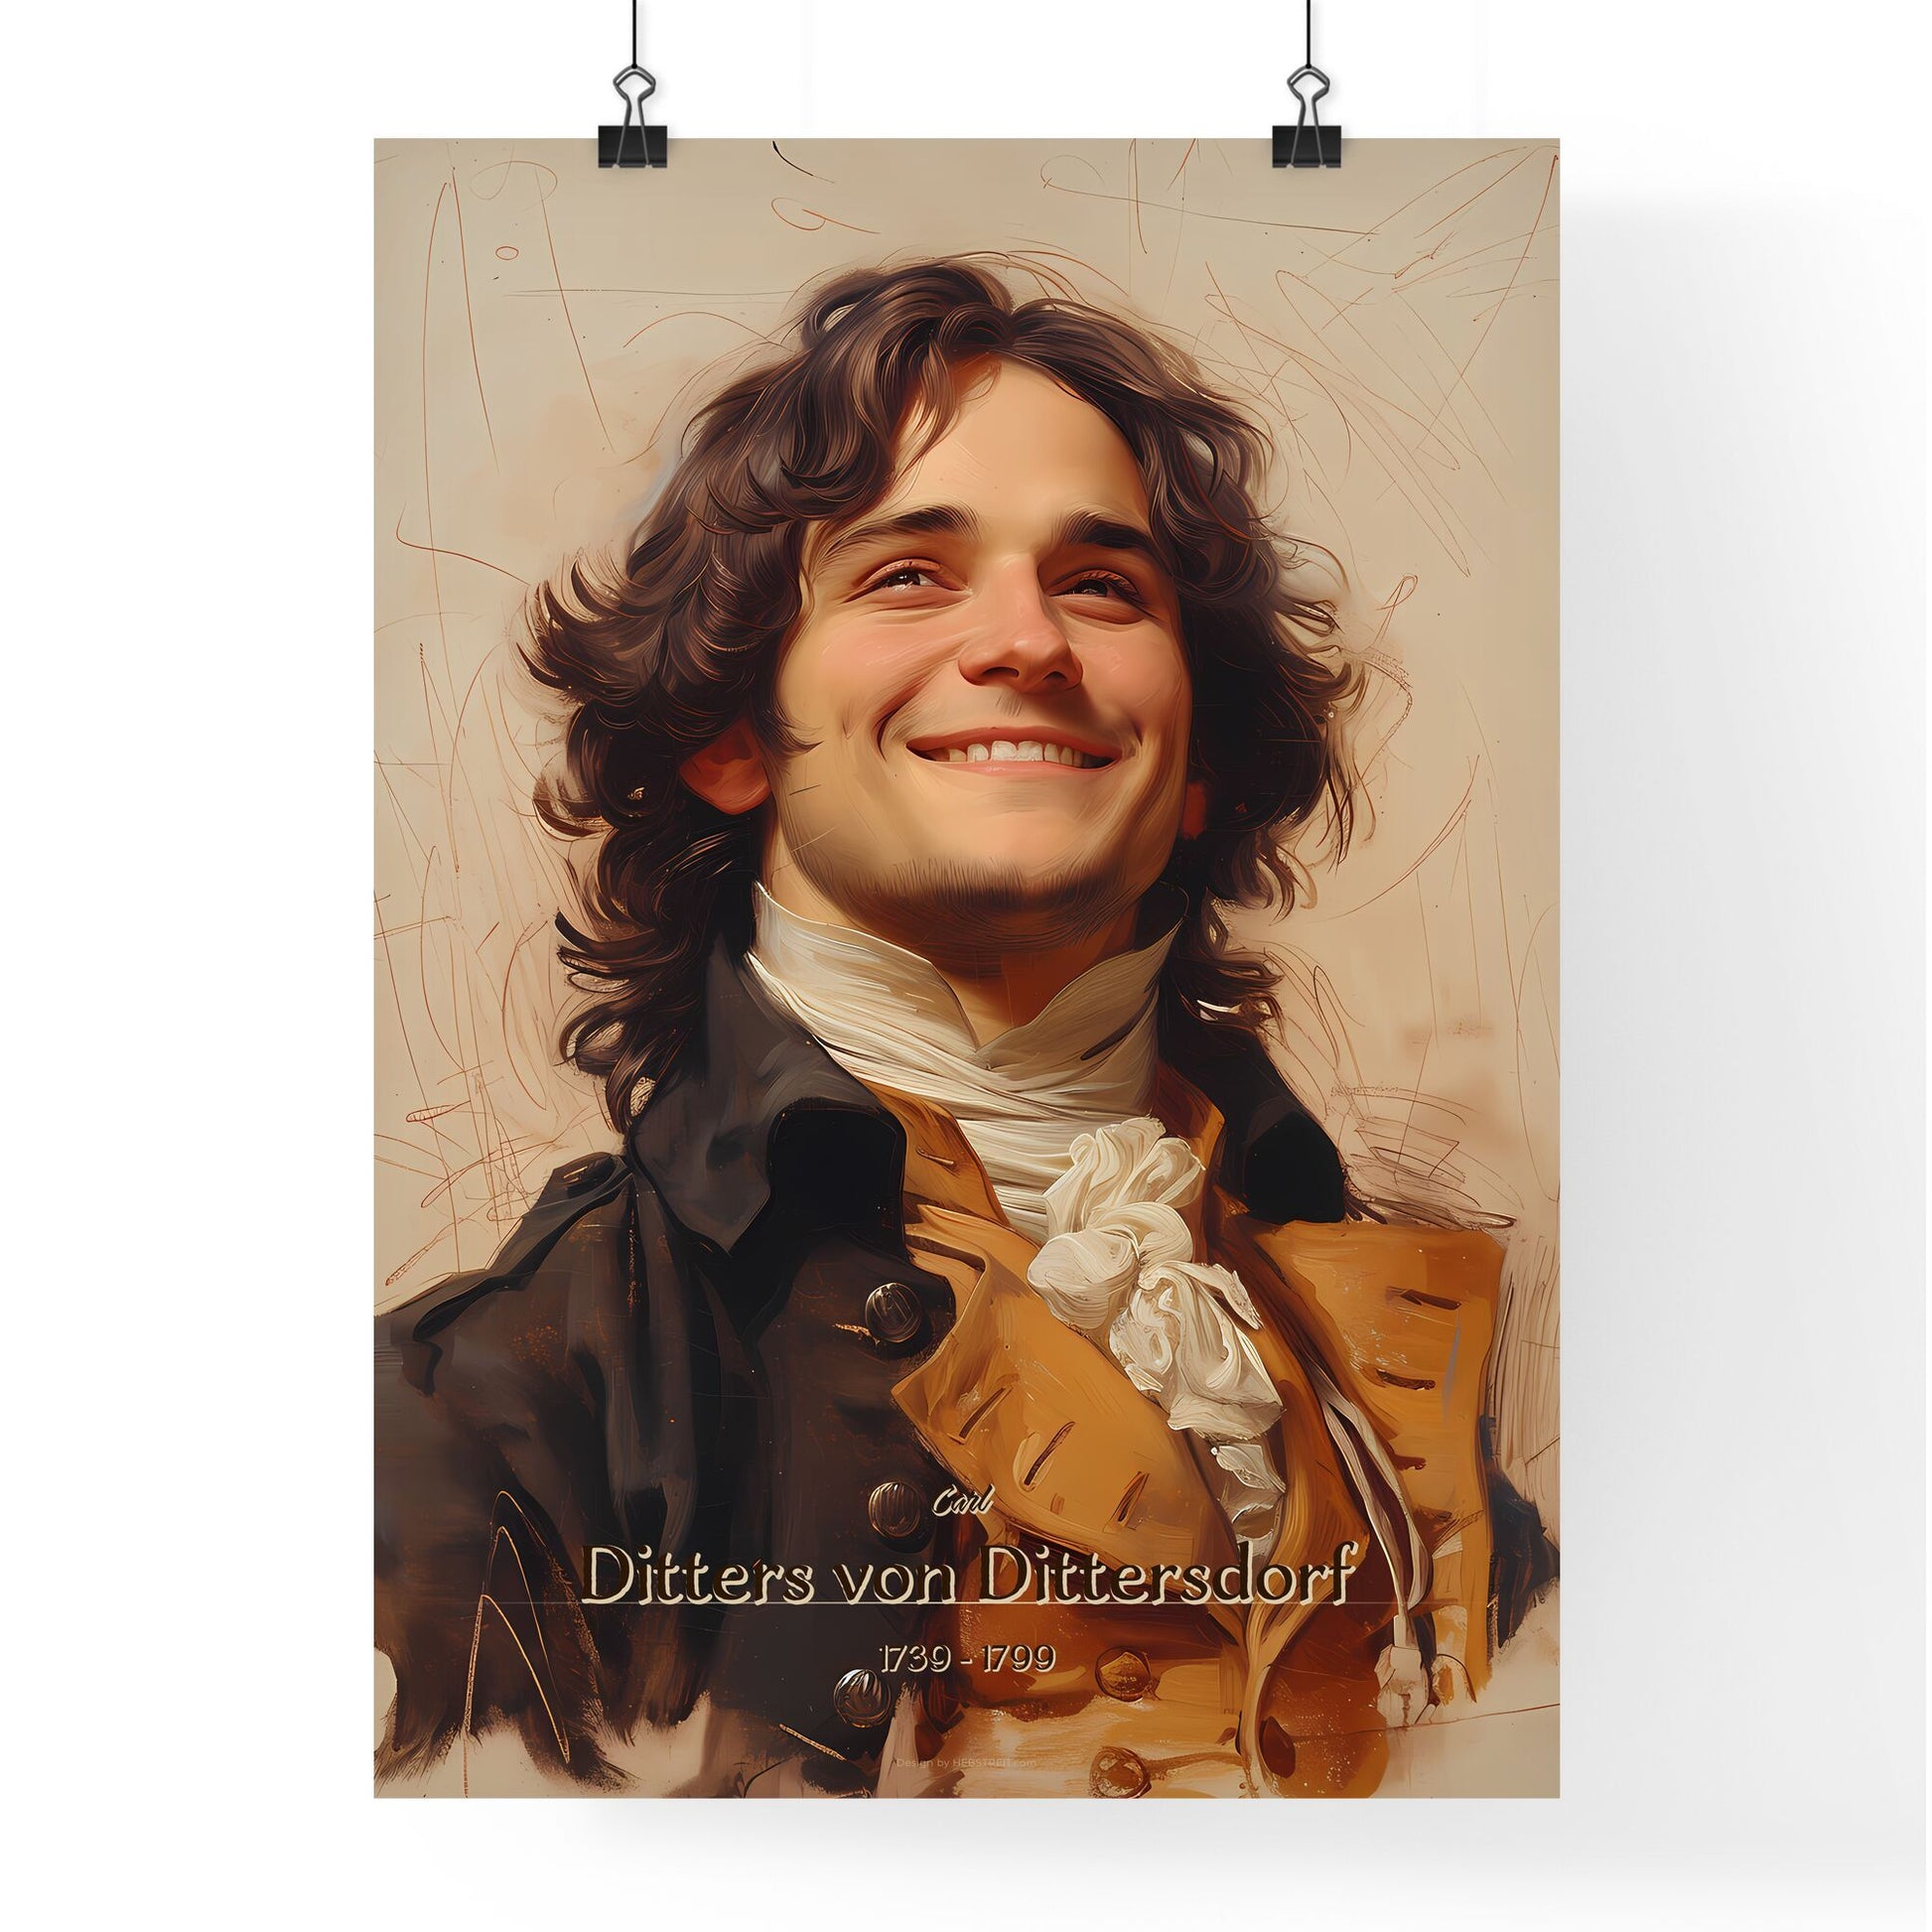 Carl, Ditters von Dittersdorf, 1739 - 1799, A Poster of a man smiling with long hair Default Title